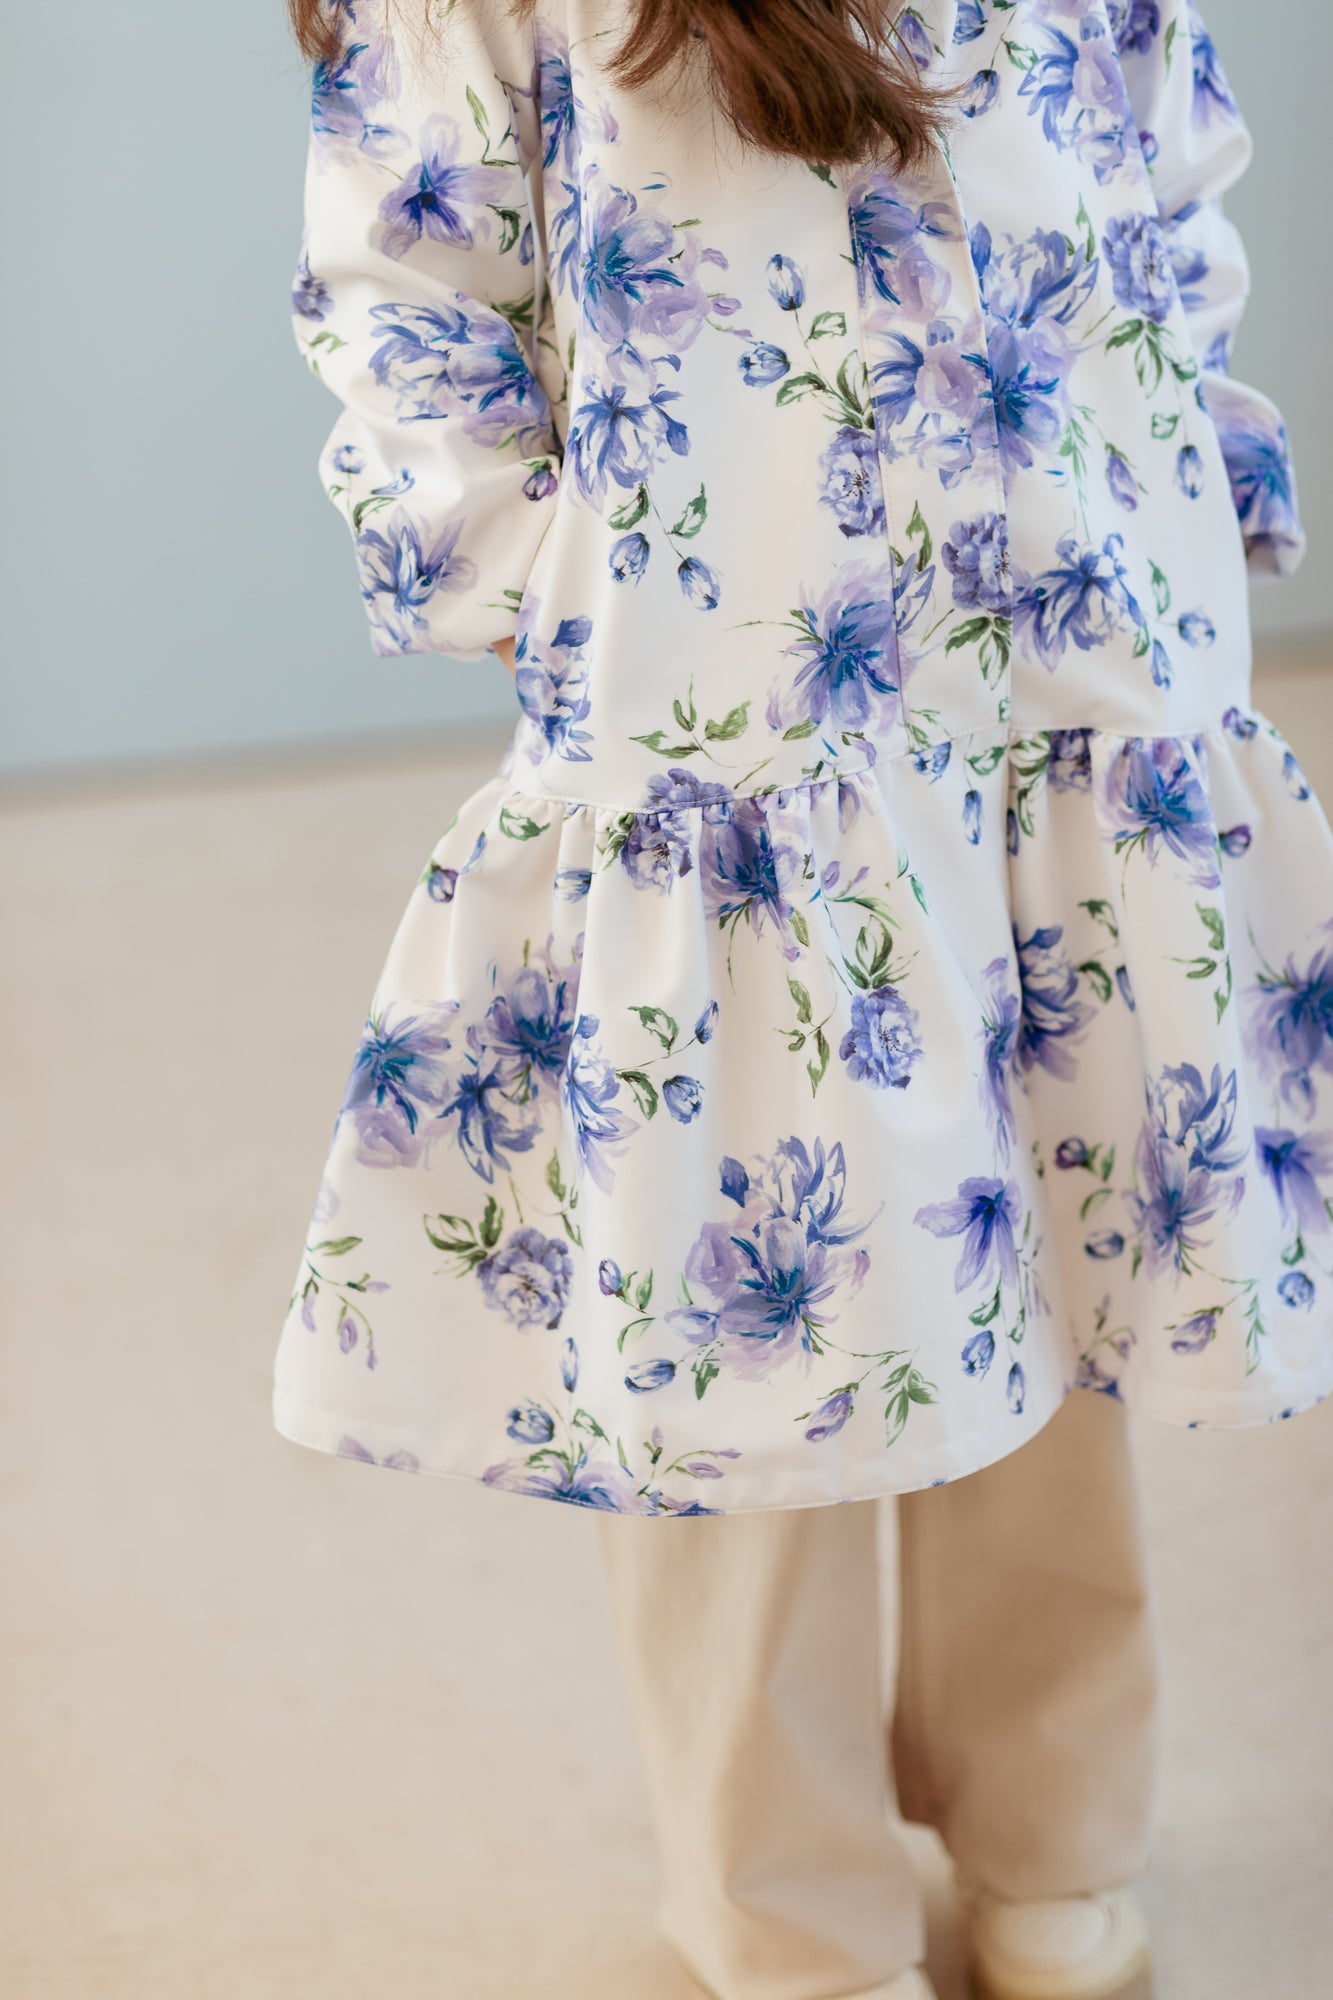 White Trapeze Coat for Girls with Blue Flower Print | 'Floral Dream'